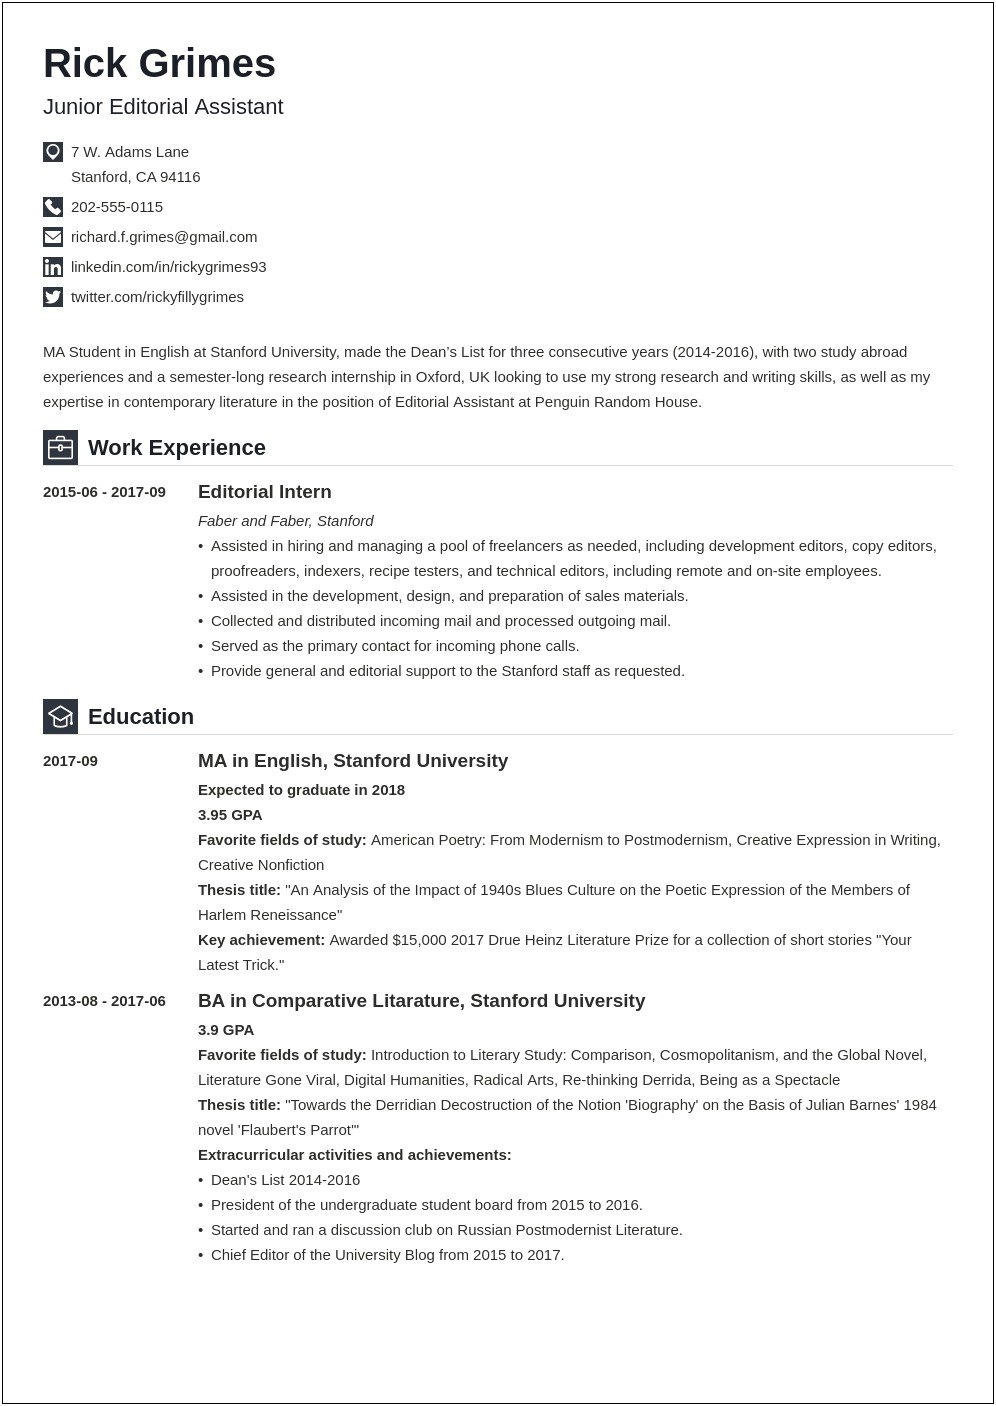 Resume Objective For Entry Level Engineer